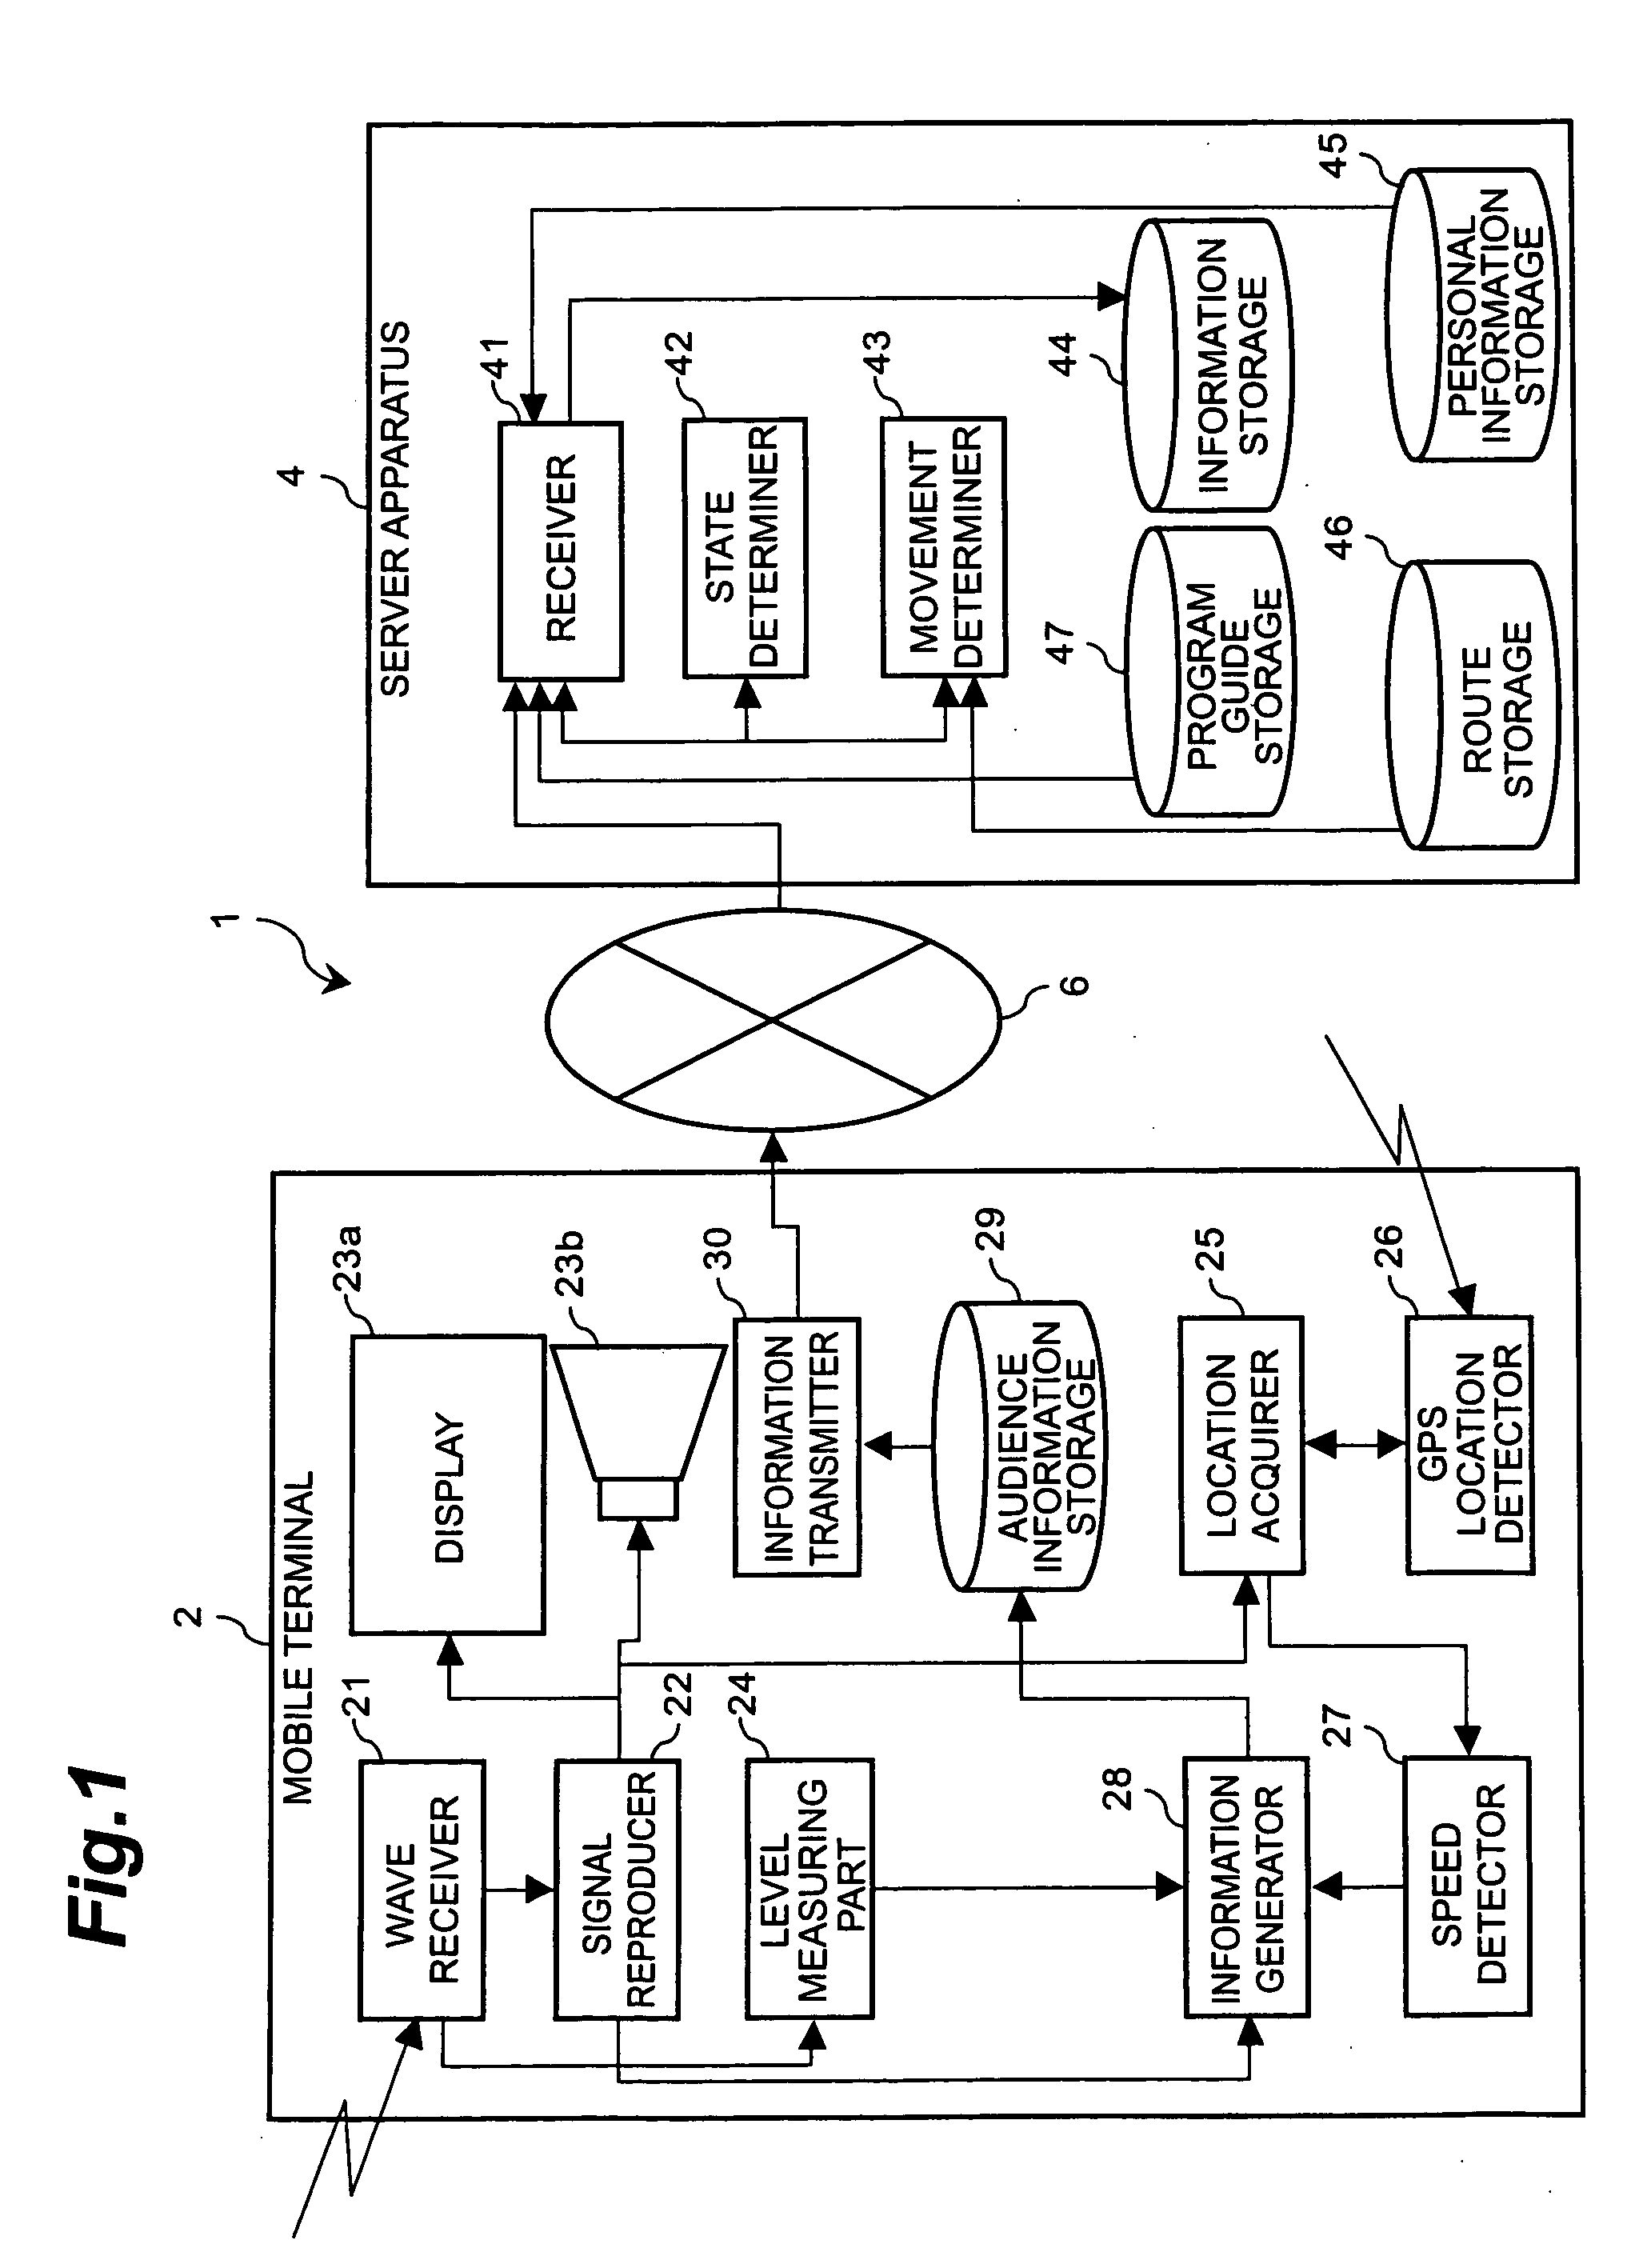 Mobile terminal, audience information collection system, and audience information collection method